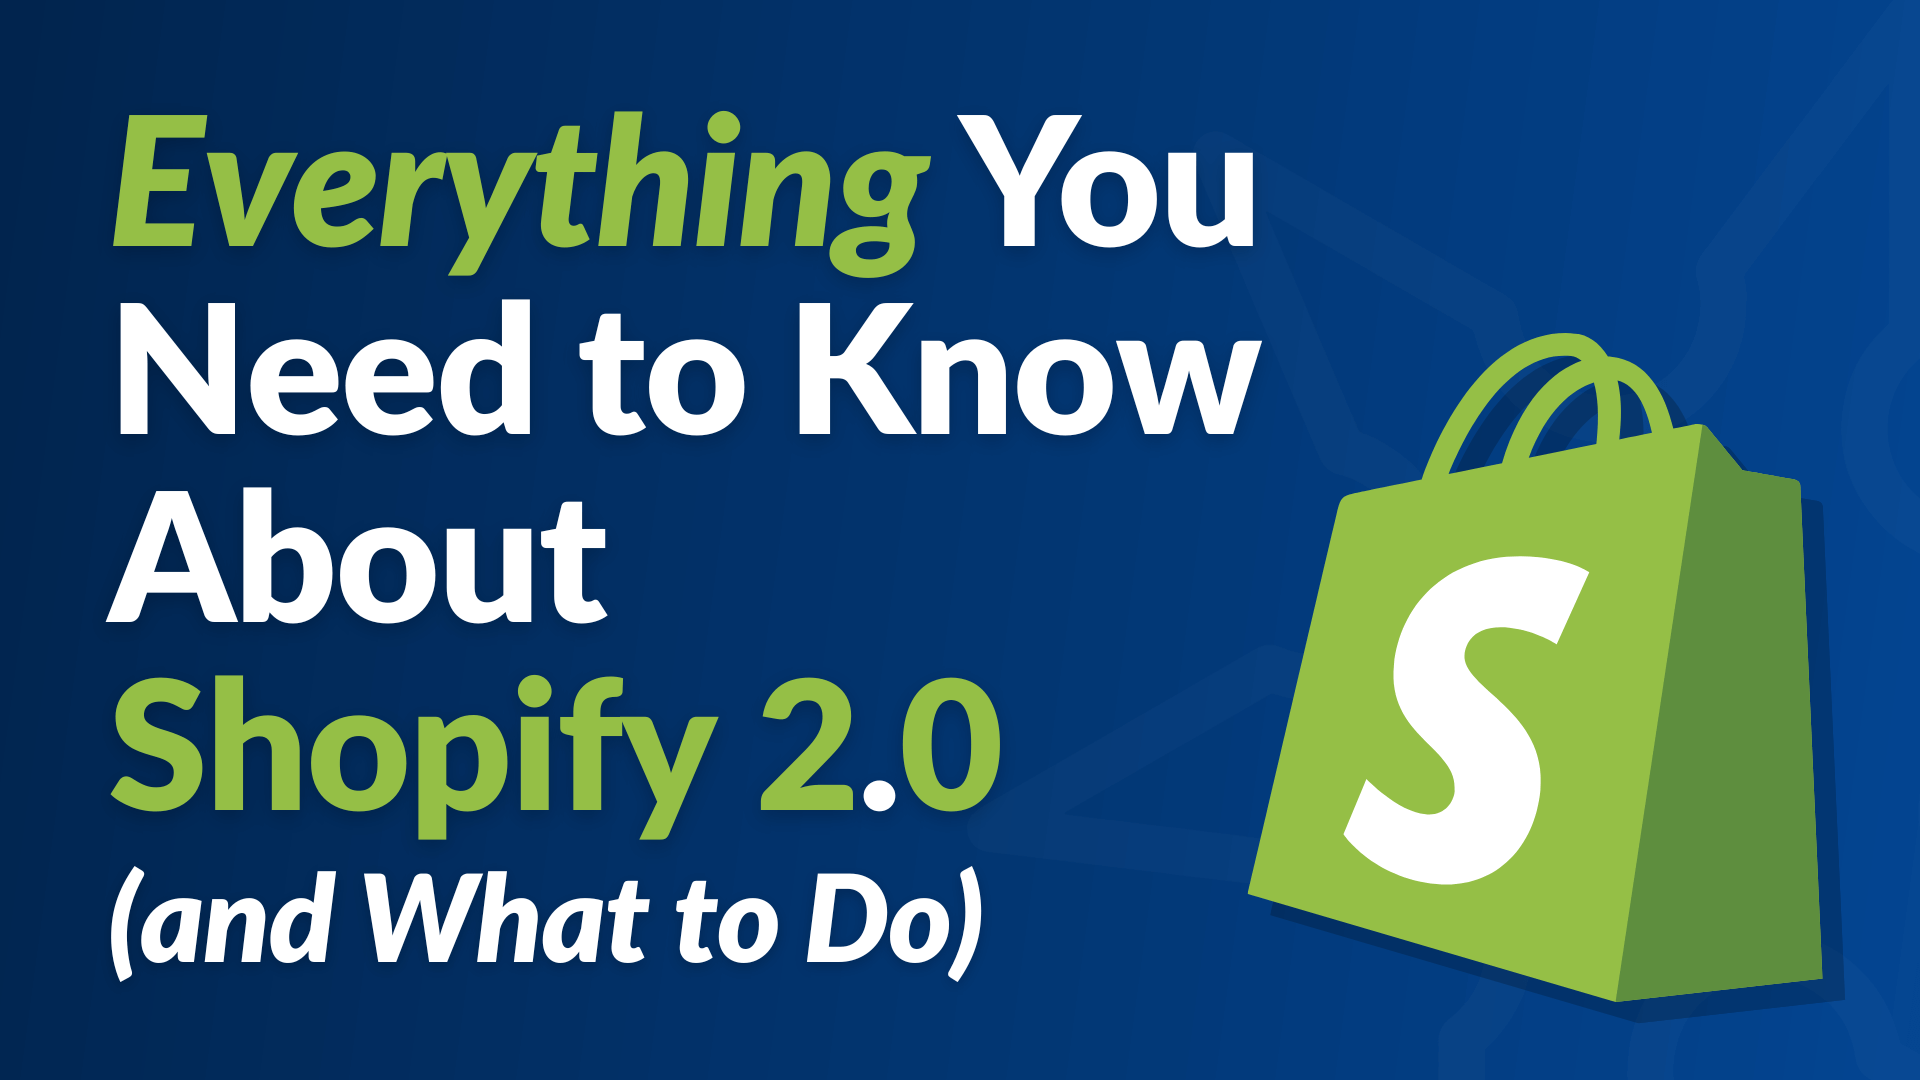 Everything You Need to Know About Shopify 2.0 (and What to Do) --